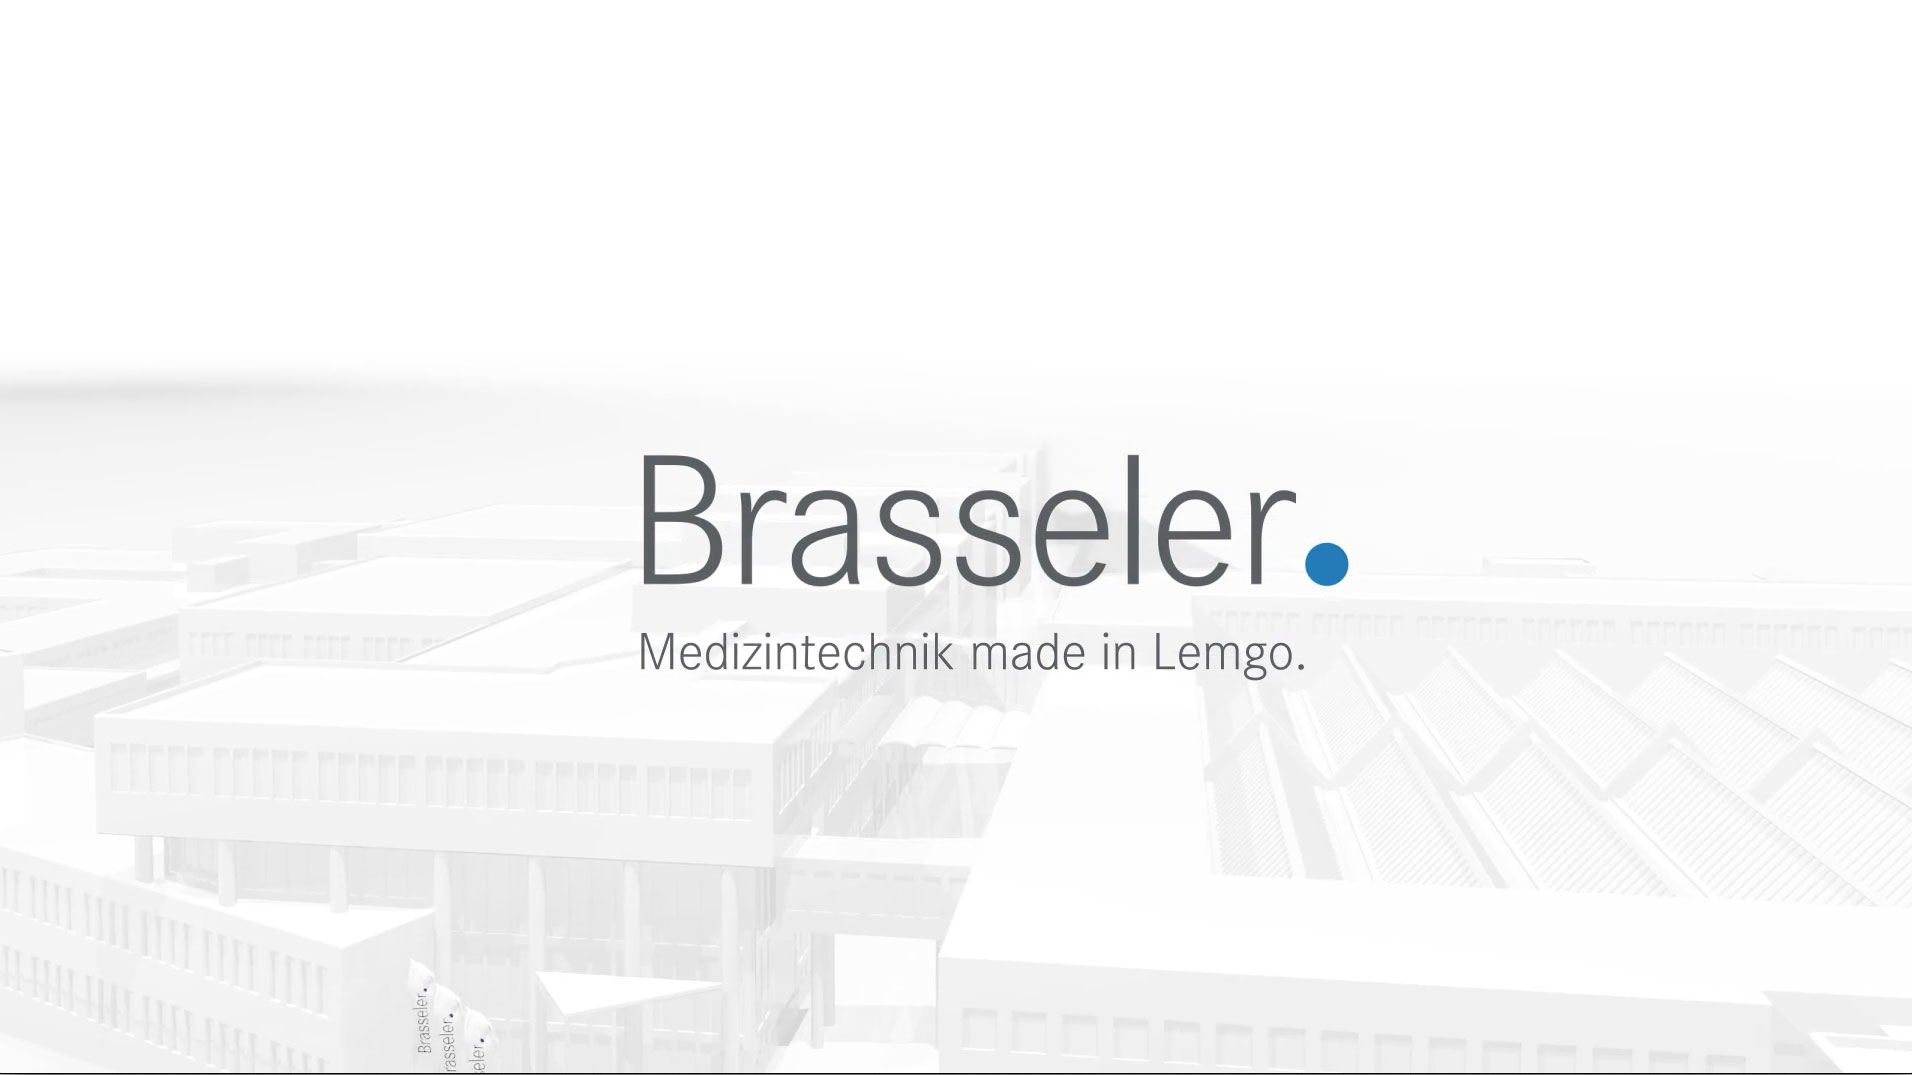 The Gebr. Brasseler GmbH & Co. KG group Lemgo announces a realignment in the divisions Komet Dental and Komet Medical